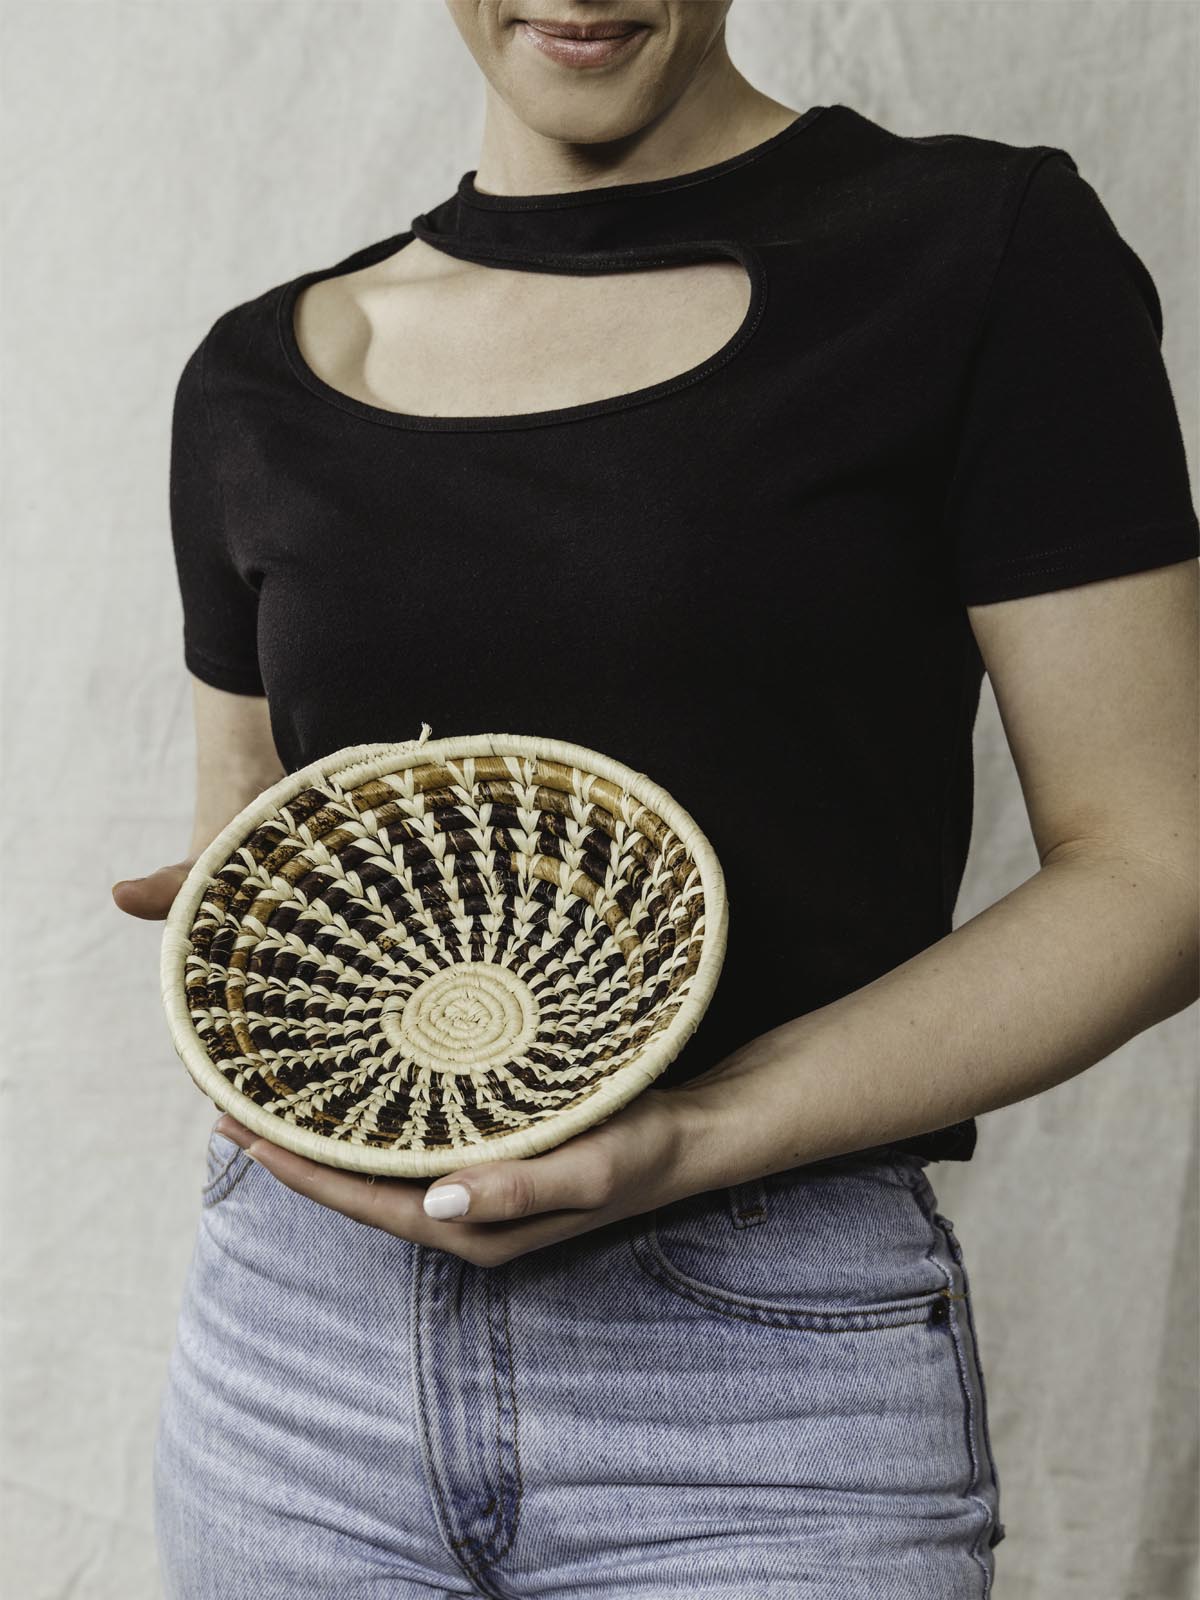 Model holding small brown and tan basket.